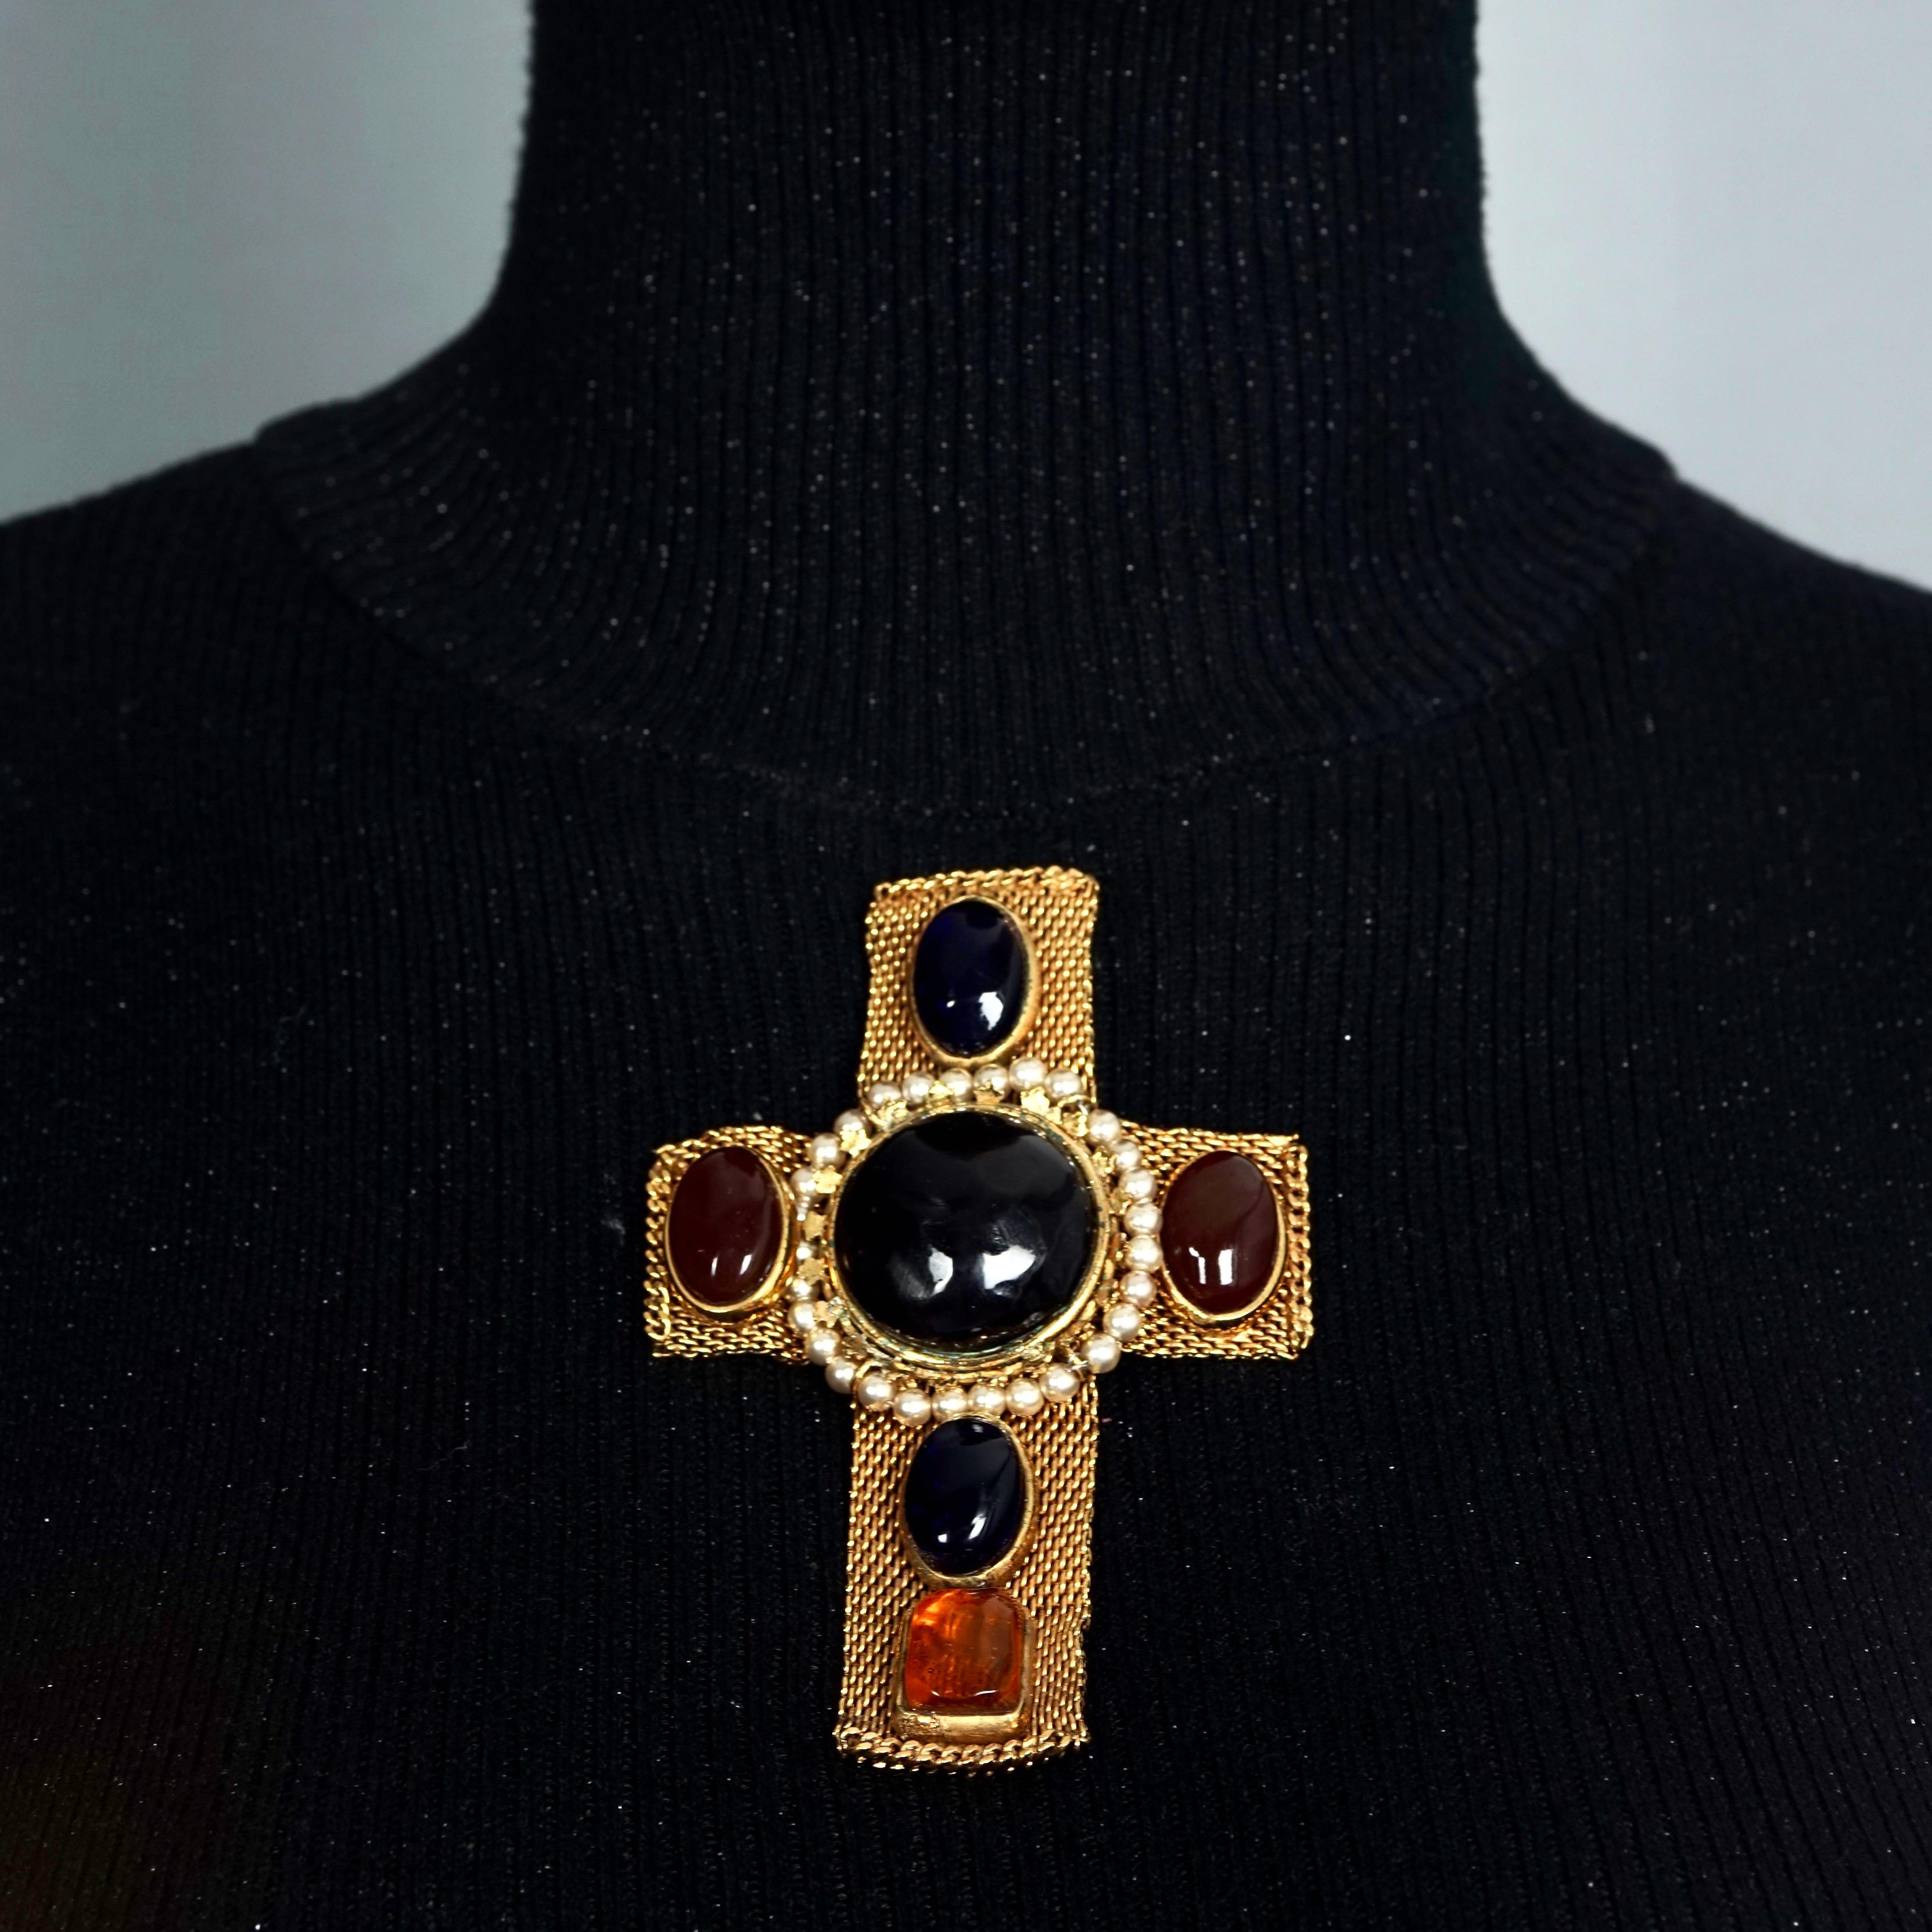 Vintage Massive CHANEL Gripoix Cross Mesh Clip Brooch

Measurements:
Height: 4.29 inches (10.9 cm)
Width: 2.79 inches (7.1 cm)

Features:
- 100% Authentic CHANEL.
- Massive gilt mesh cross set with multi coloured Gripoix/ poured glass.
- Gold tone